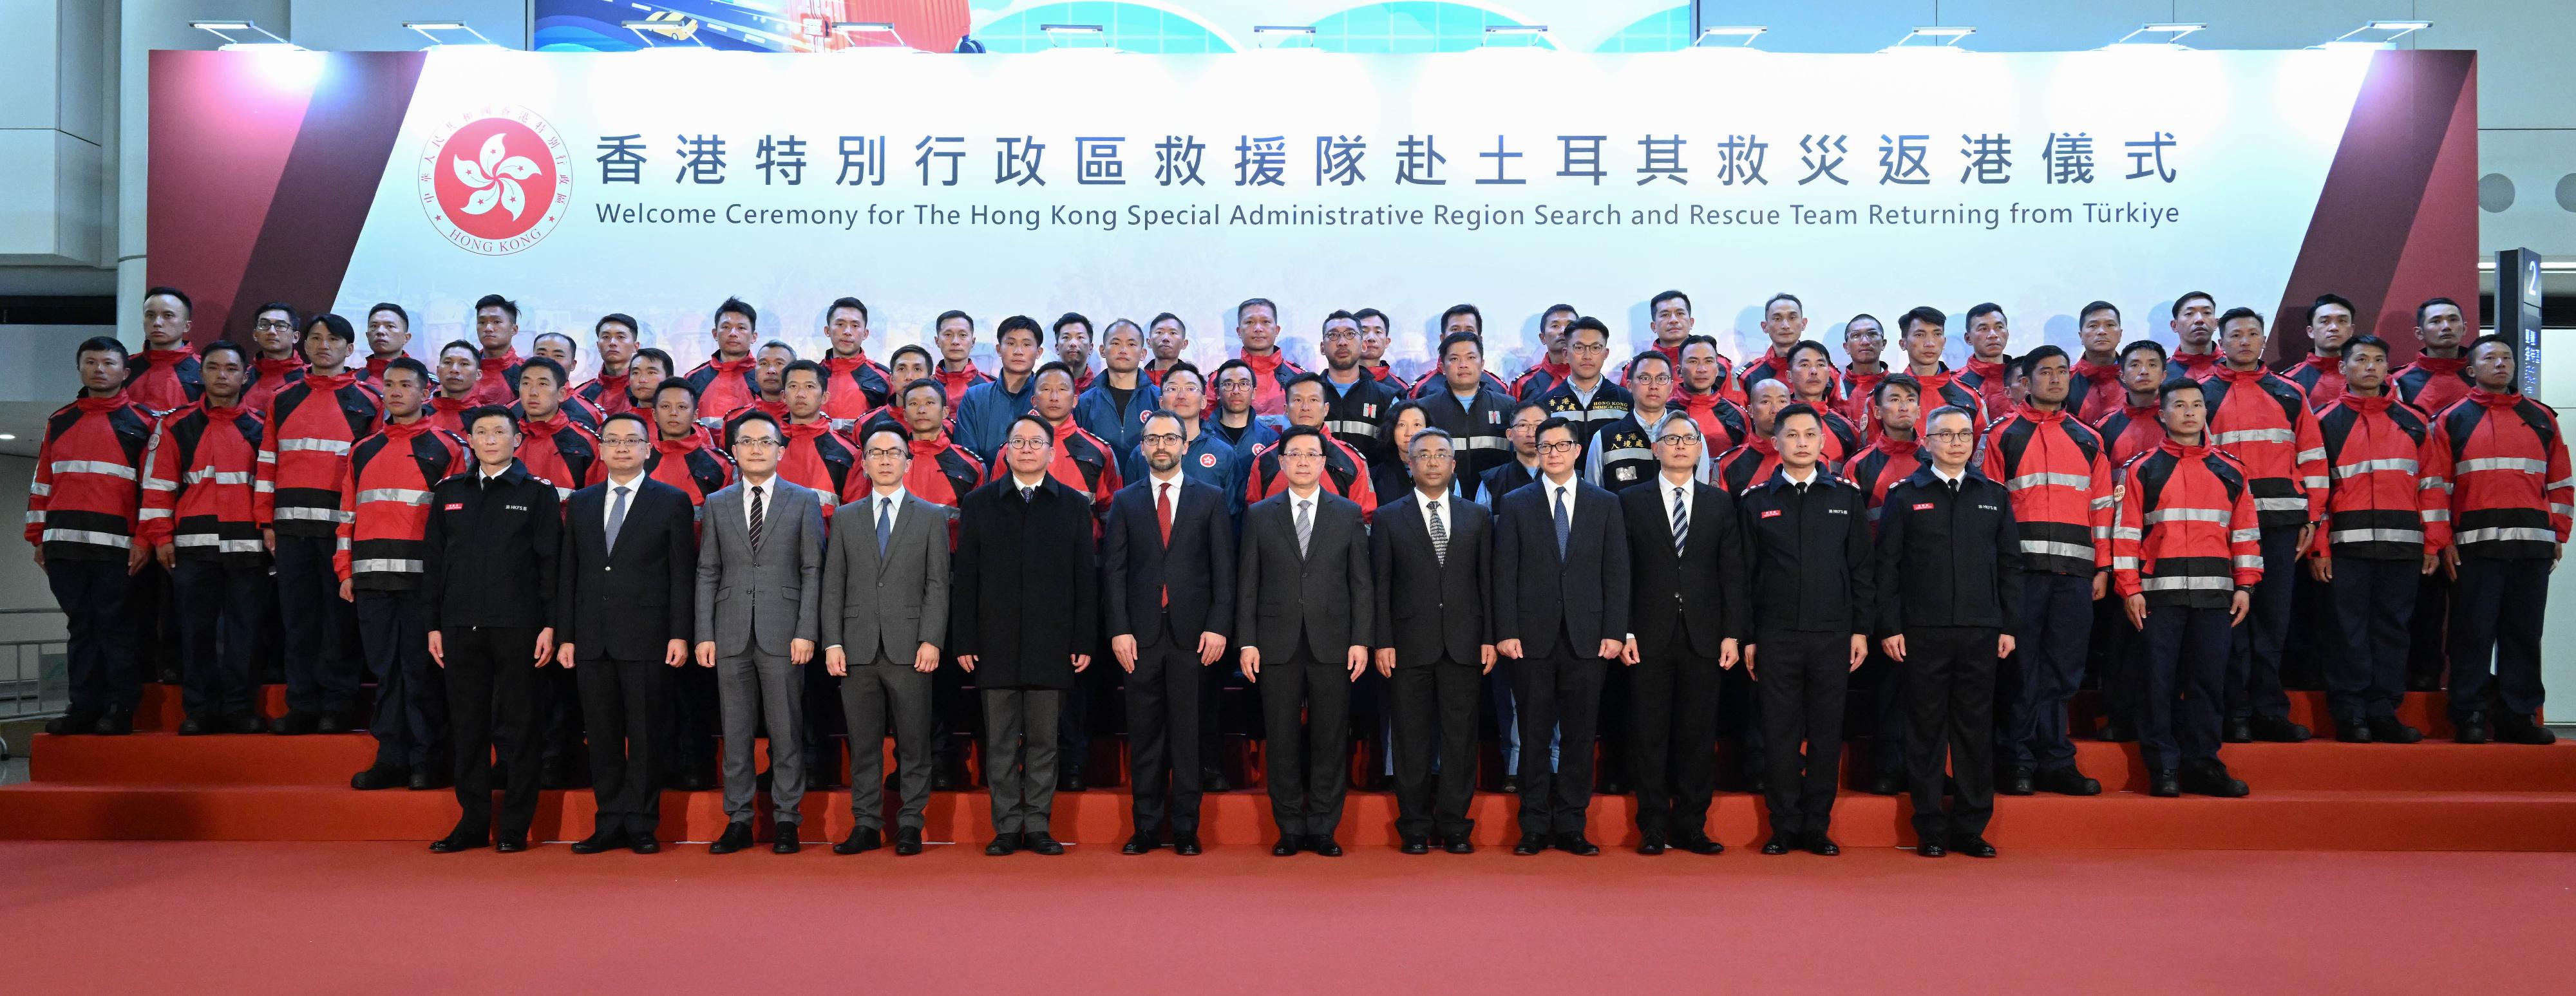 The Chief Executive, Mr John Lee, attended the Welcome Ceremony of the Hong Kong Special Administrative Region (HKSAR) Search and Rescue Team returning from Türkiye today (February 18). Photo shows Deputy Commissioner of the Office of the Commissioner of the Ministry of Foreign Affairs of the People's Republic of China in the HKSAR Mr Yang Yirui (first row, fifth right); Mr Lee (first row, sixth right); the Chief Secretary for Administration, Mr Chan Kwok-ki (first row, fifth left); the Secretary for Security, Mr Tang Ping-keung (first row, fourth right); the Director of Health, Dr Ronald Lam (first row, third left); the Director of Fire Services, Mr Andy Yeung (first row, second right); the Deputy Director of Immigration (Control, Visa and Documents), Mr Benson Kwok (first row, second left); the Consul General of Türkiye in Hong Kong, Mr Peyami Kalyoncu (first row, sixth left); and the HKSAR Search and Rescue Team at the ceremony. 